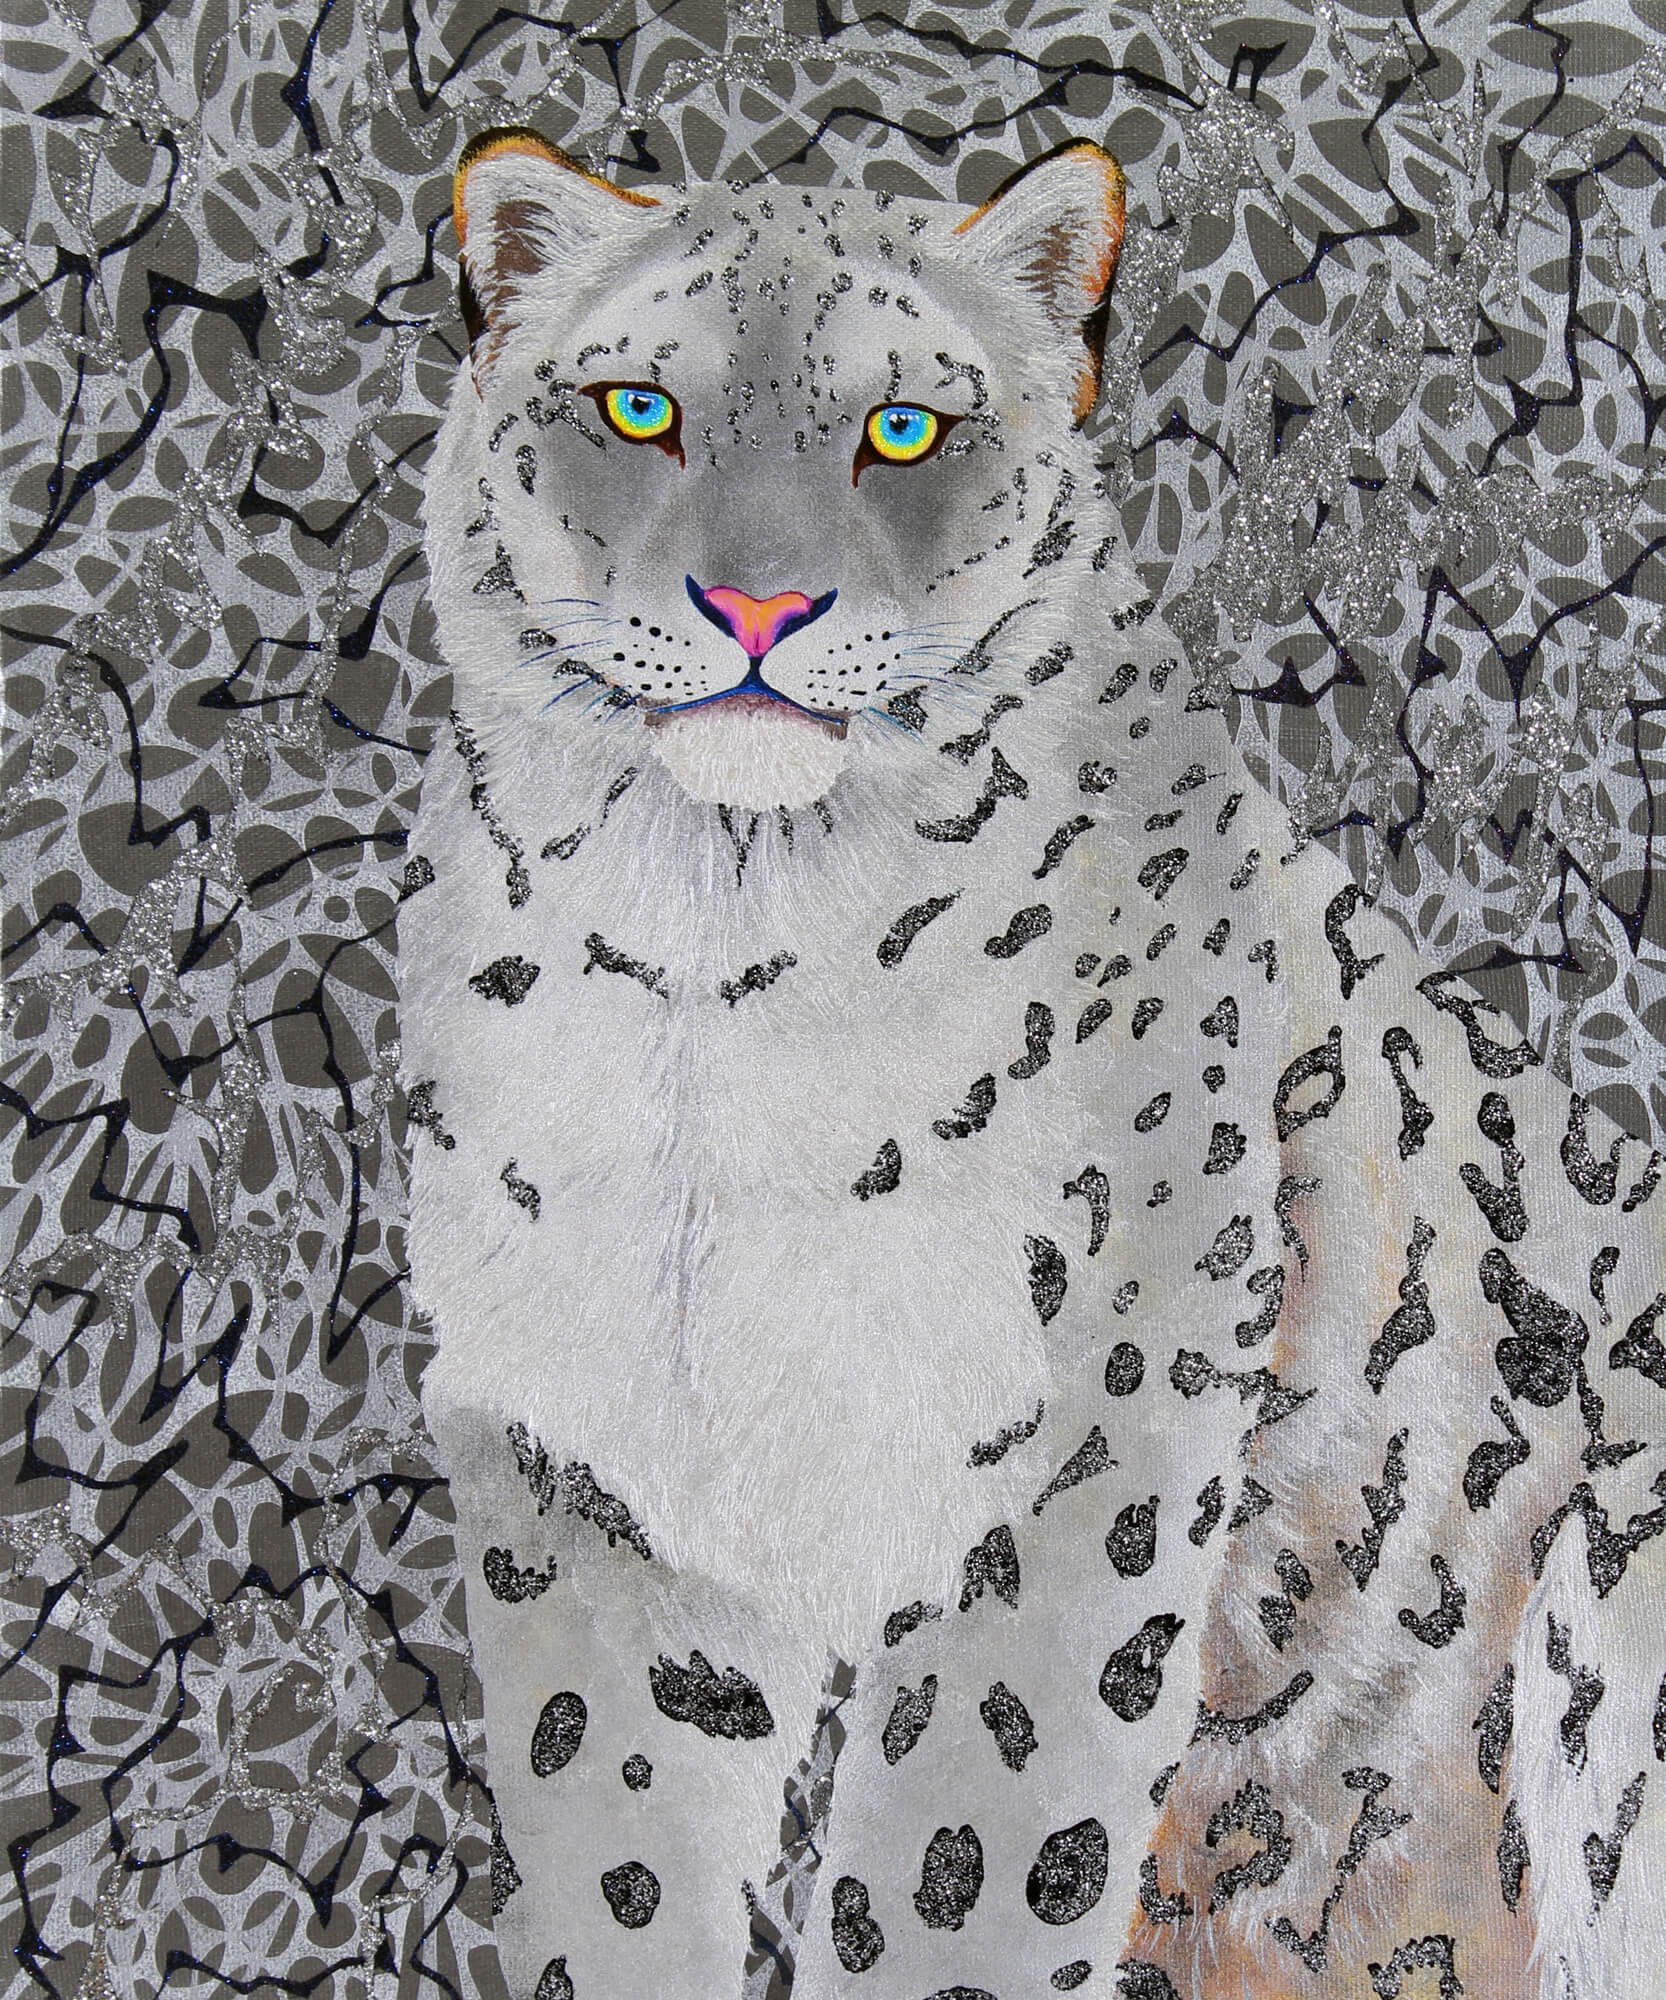 Silver Snowleopard改行
Acrylic and glitter on canvas,455×380mm, 2016